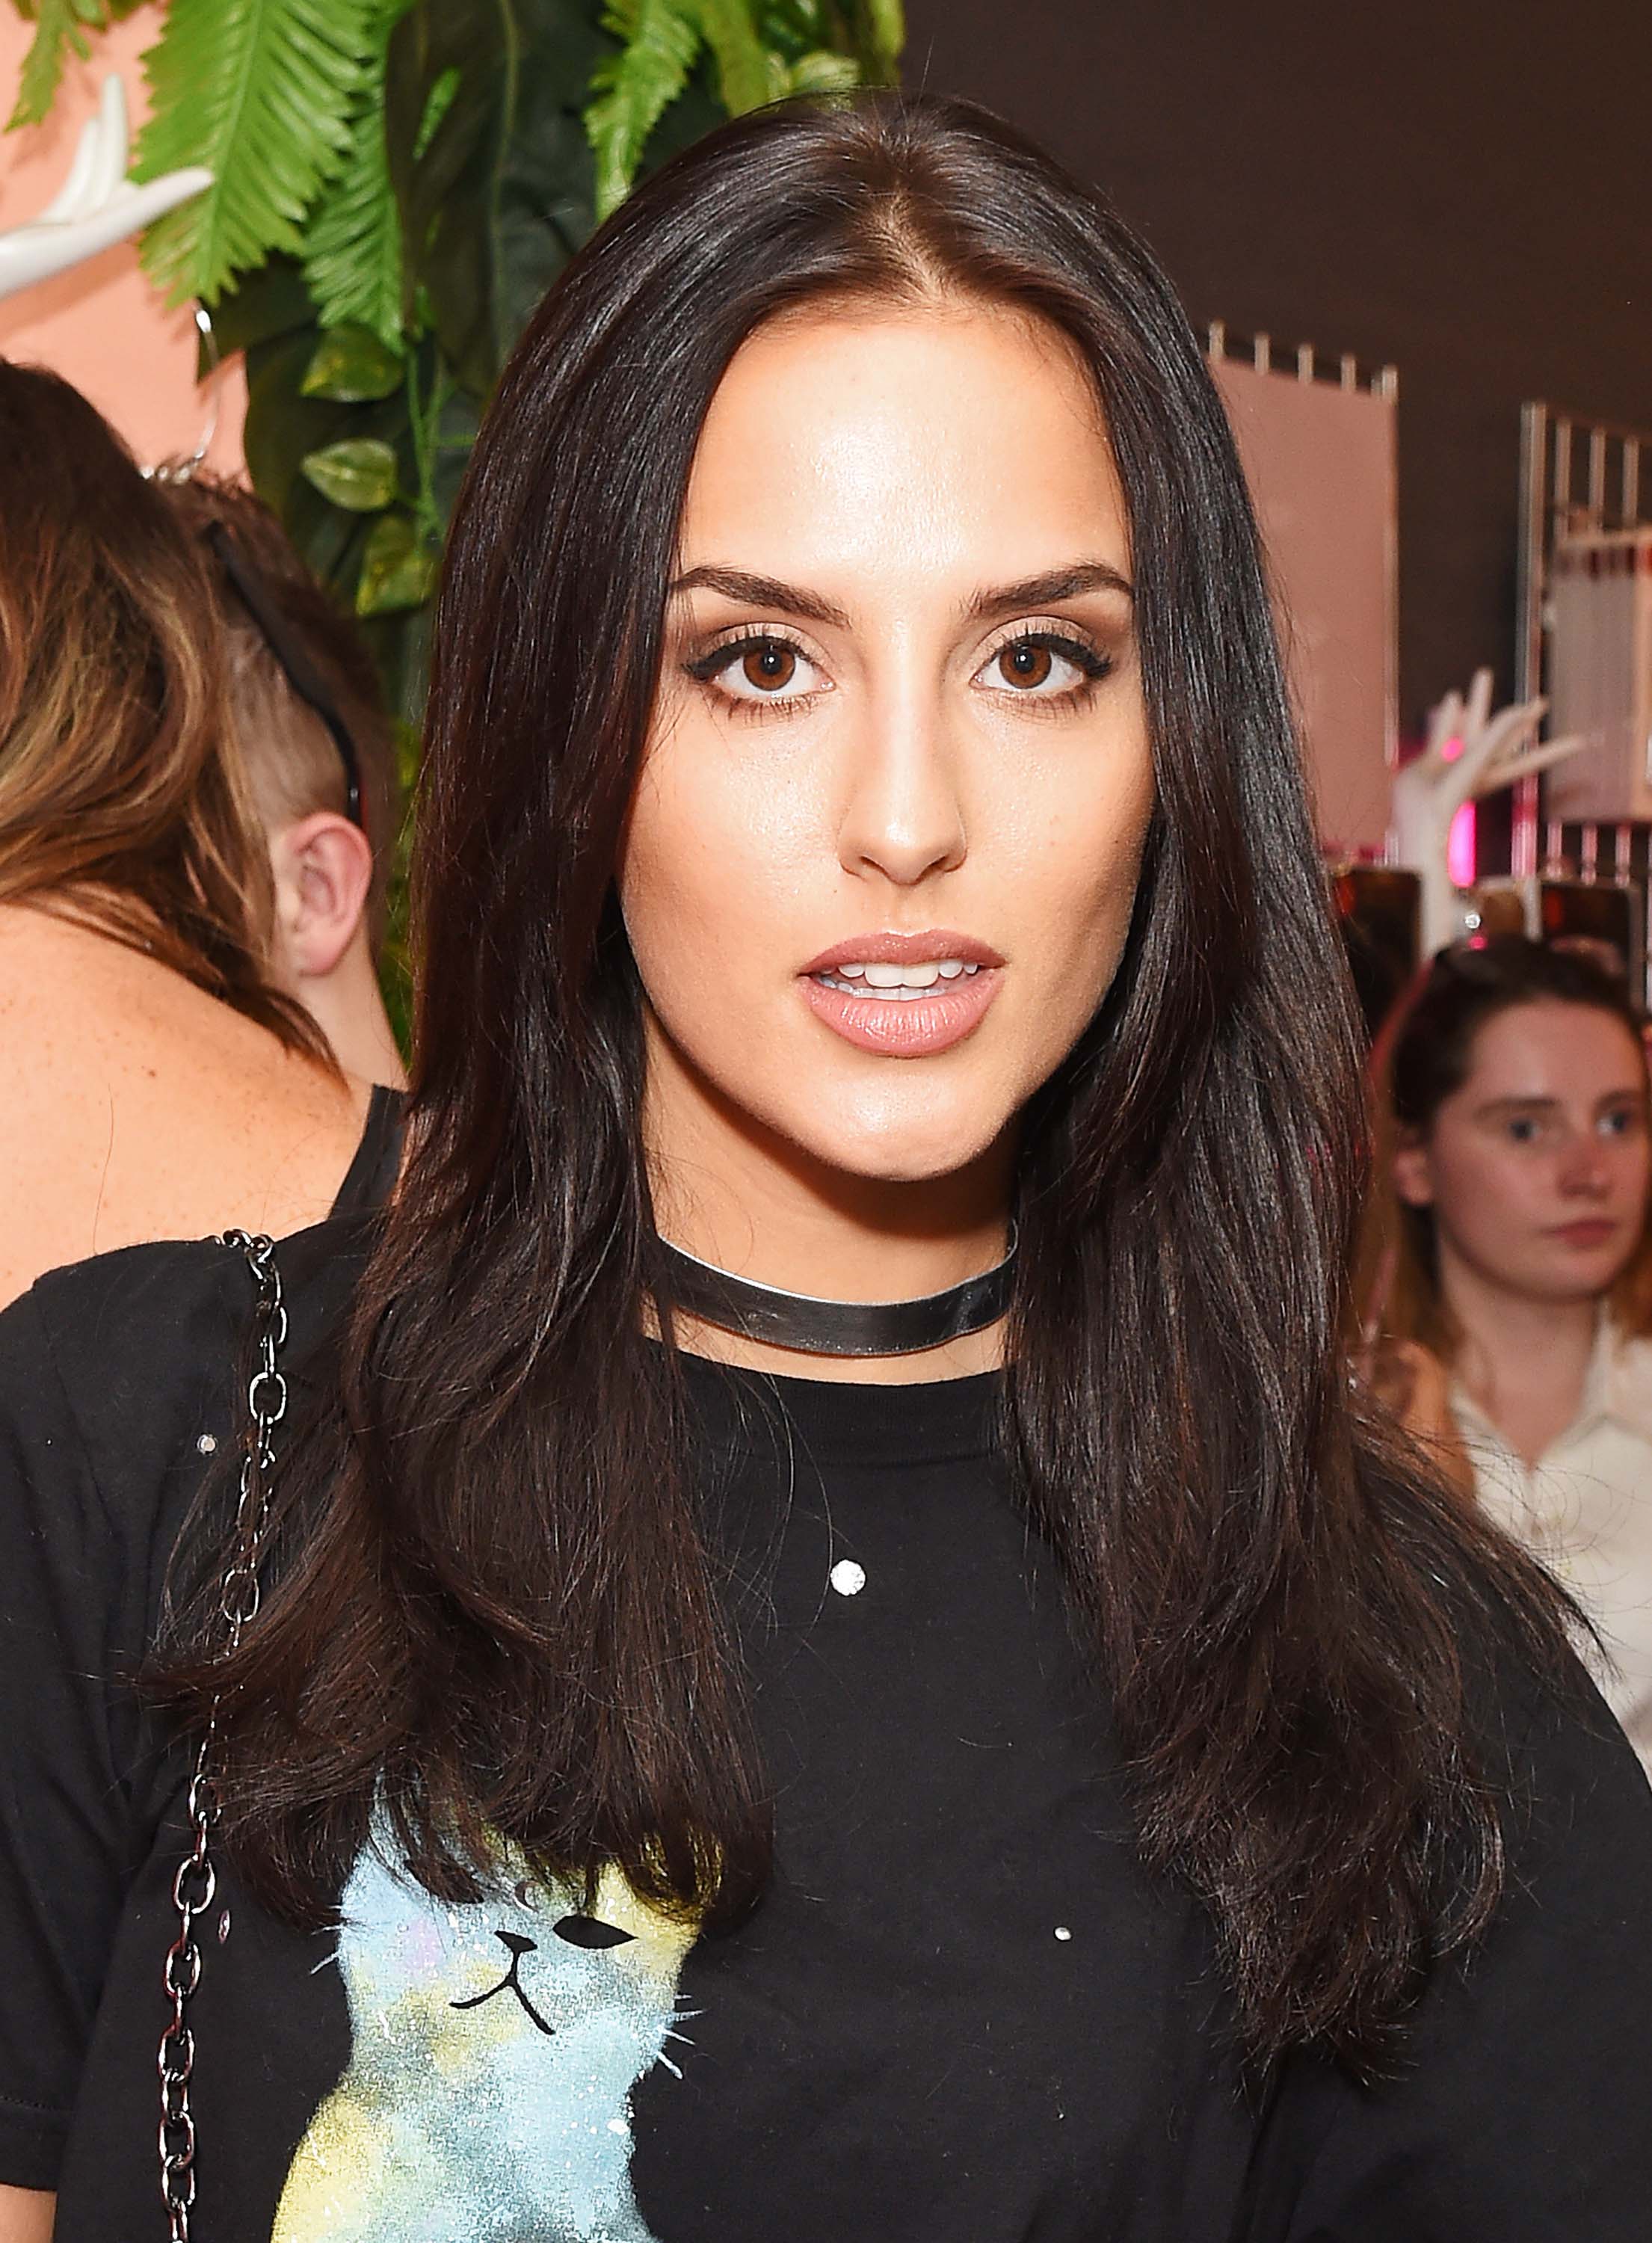 Lucy Watson attends the launch of the Skinnydip x Coca-Cola collection